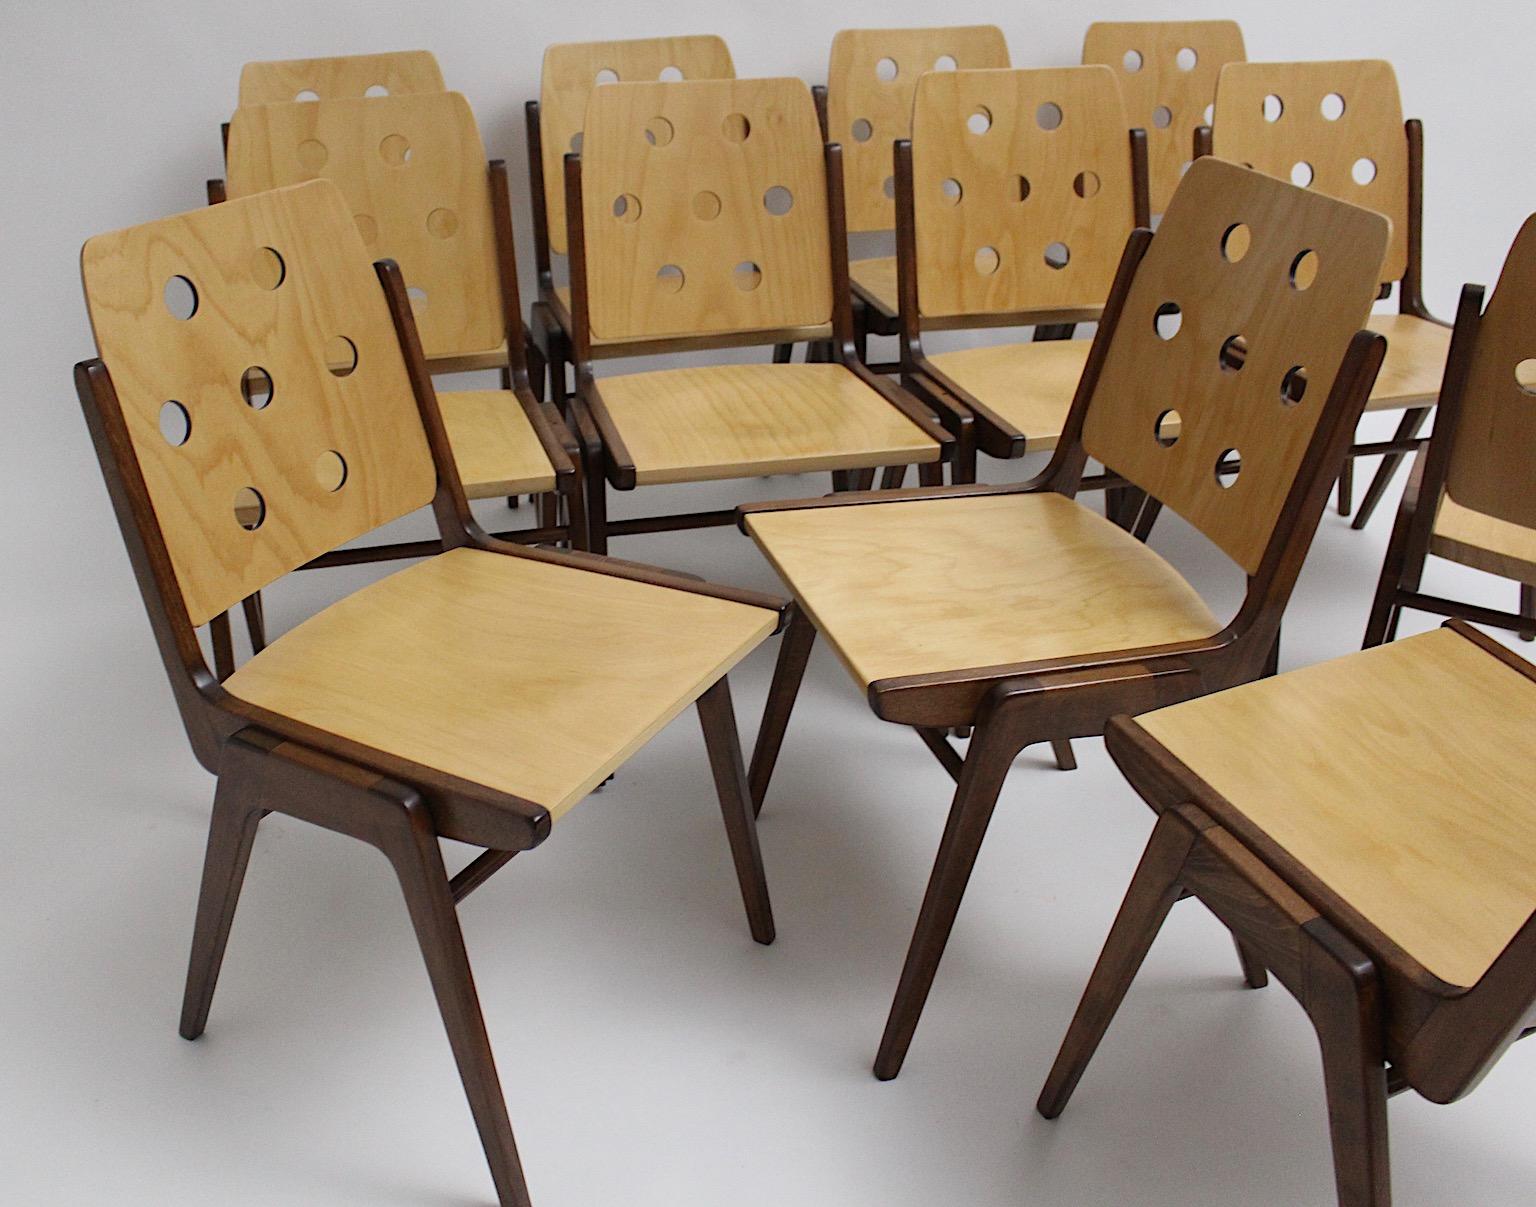 Mid Century Modern vintage authentic twelve ( 12 ) dining chairs from beech and plywood in bicolor blonde and brown color by Franz Schuster, 1050s Vienna.
An iconic set of twelve 12 dining chairs or chairs by Franz Schuster in beautiful shape with